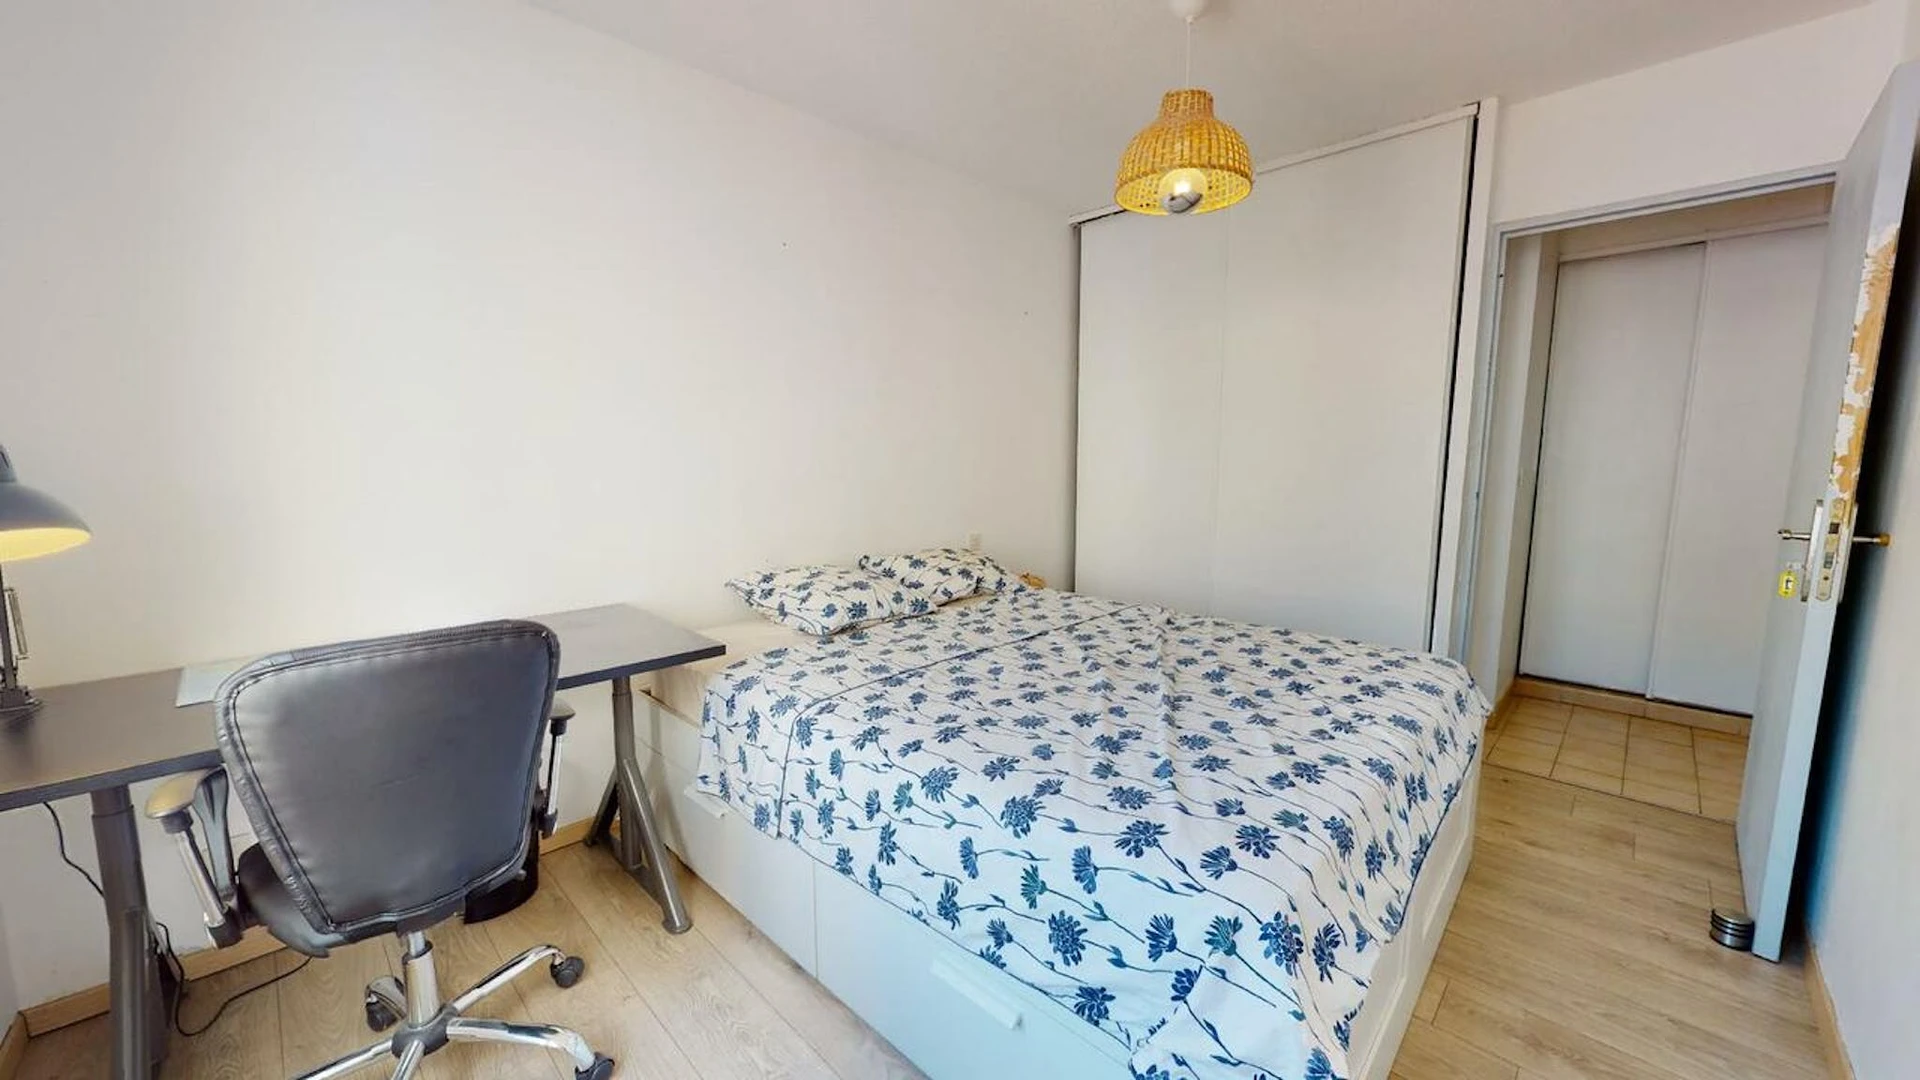 Room for rent in a shared flat in toulon